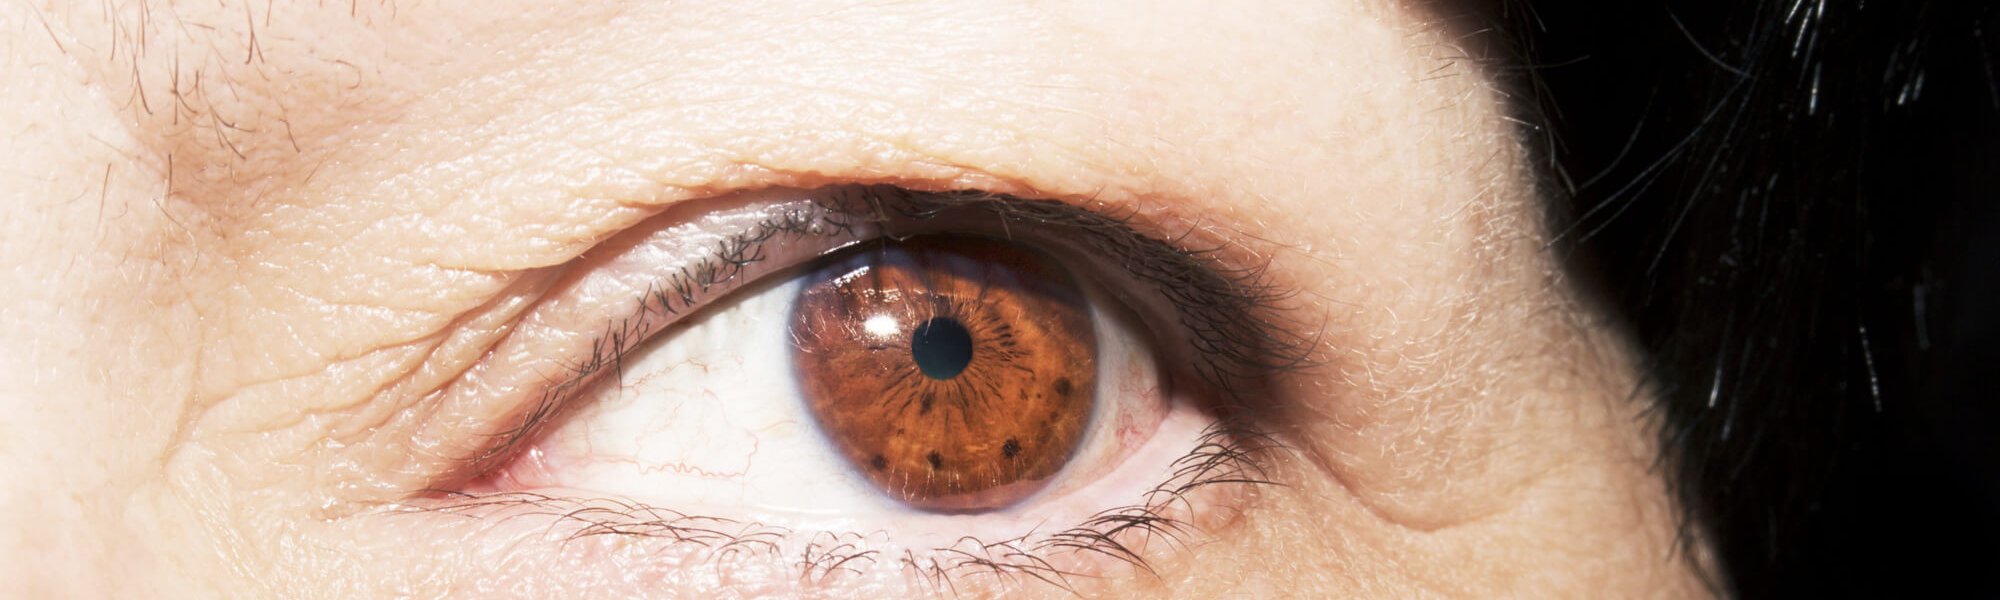 Eye Contour Acupressure The Solution For Younger Looking Eyes Article